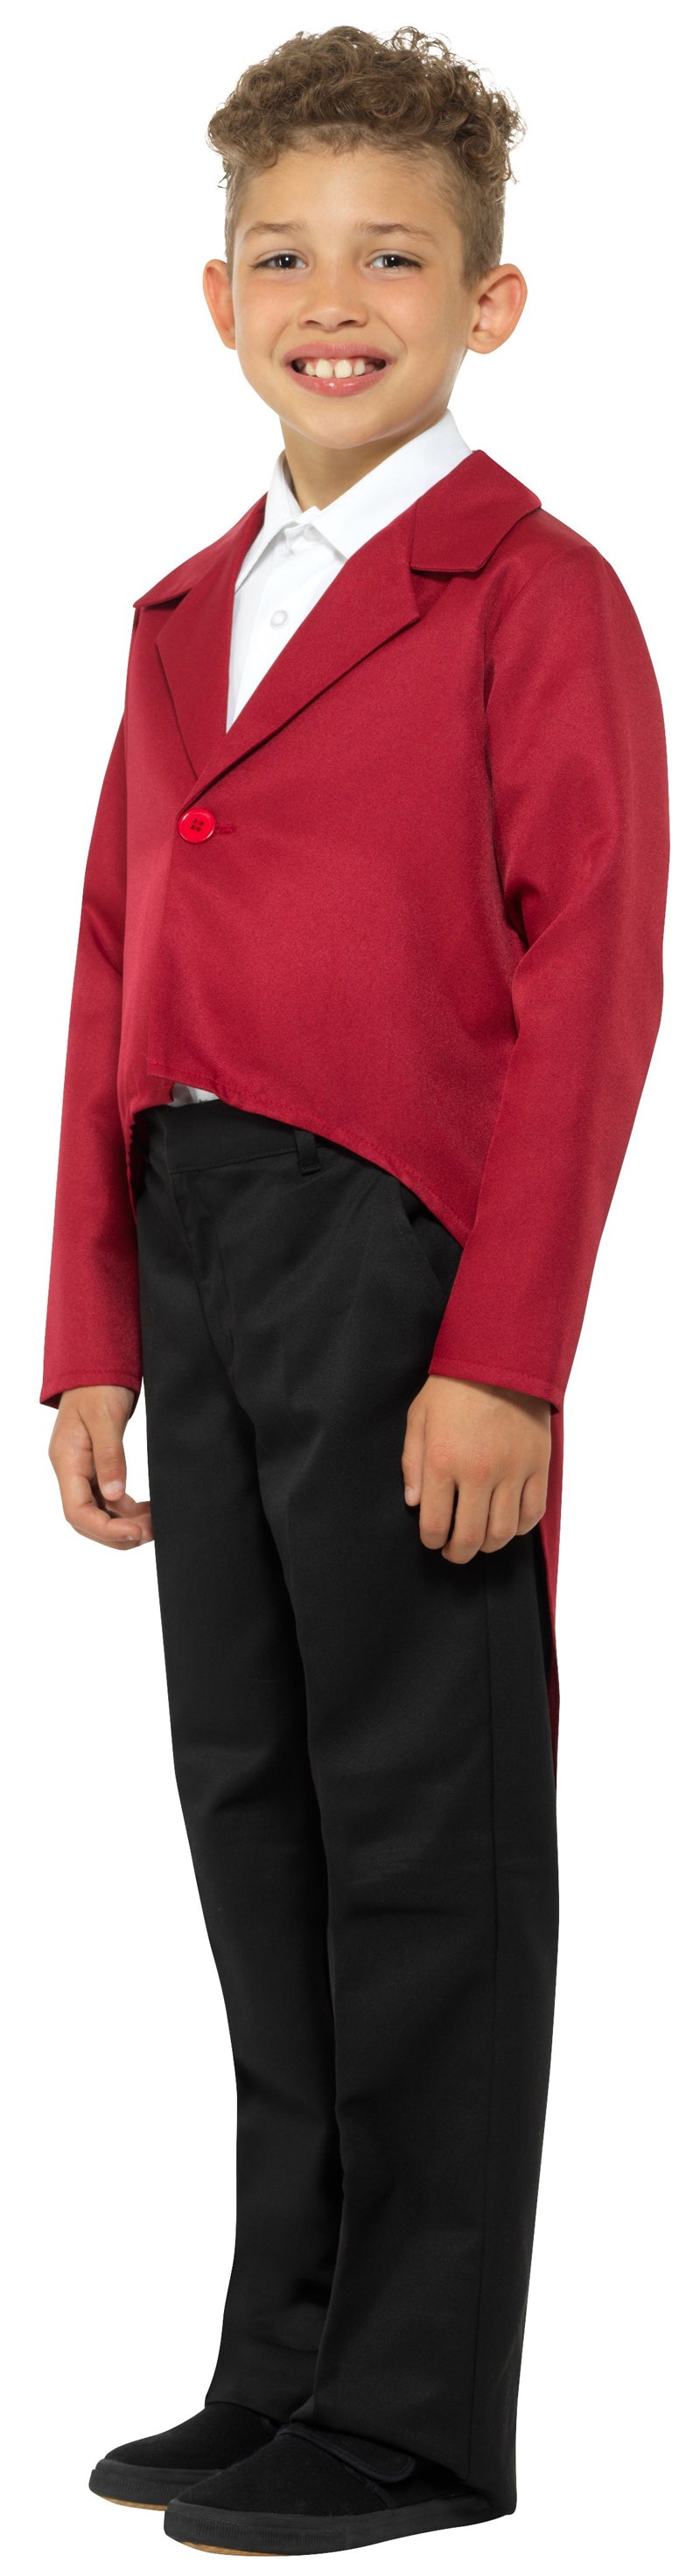 Dashing Red Tailcoat Accessory for Kids